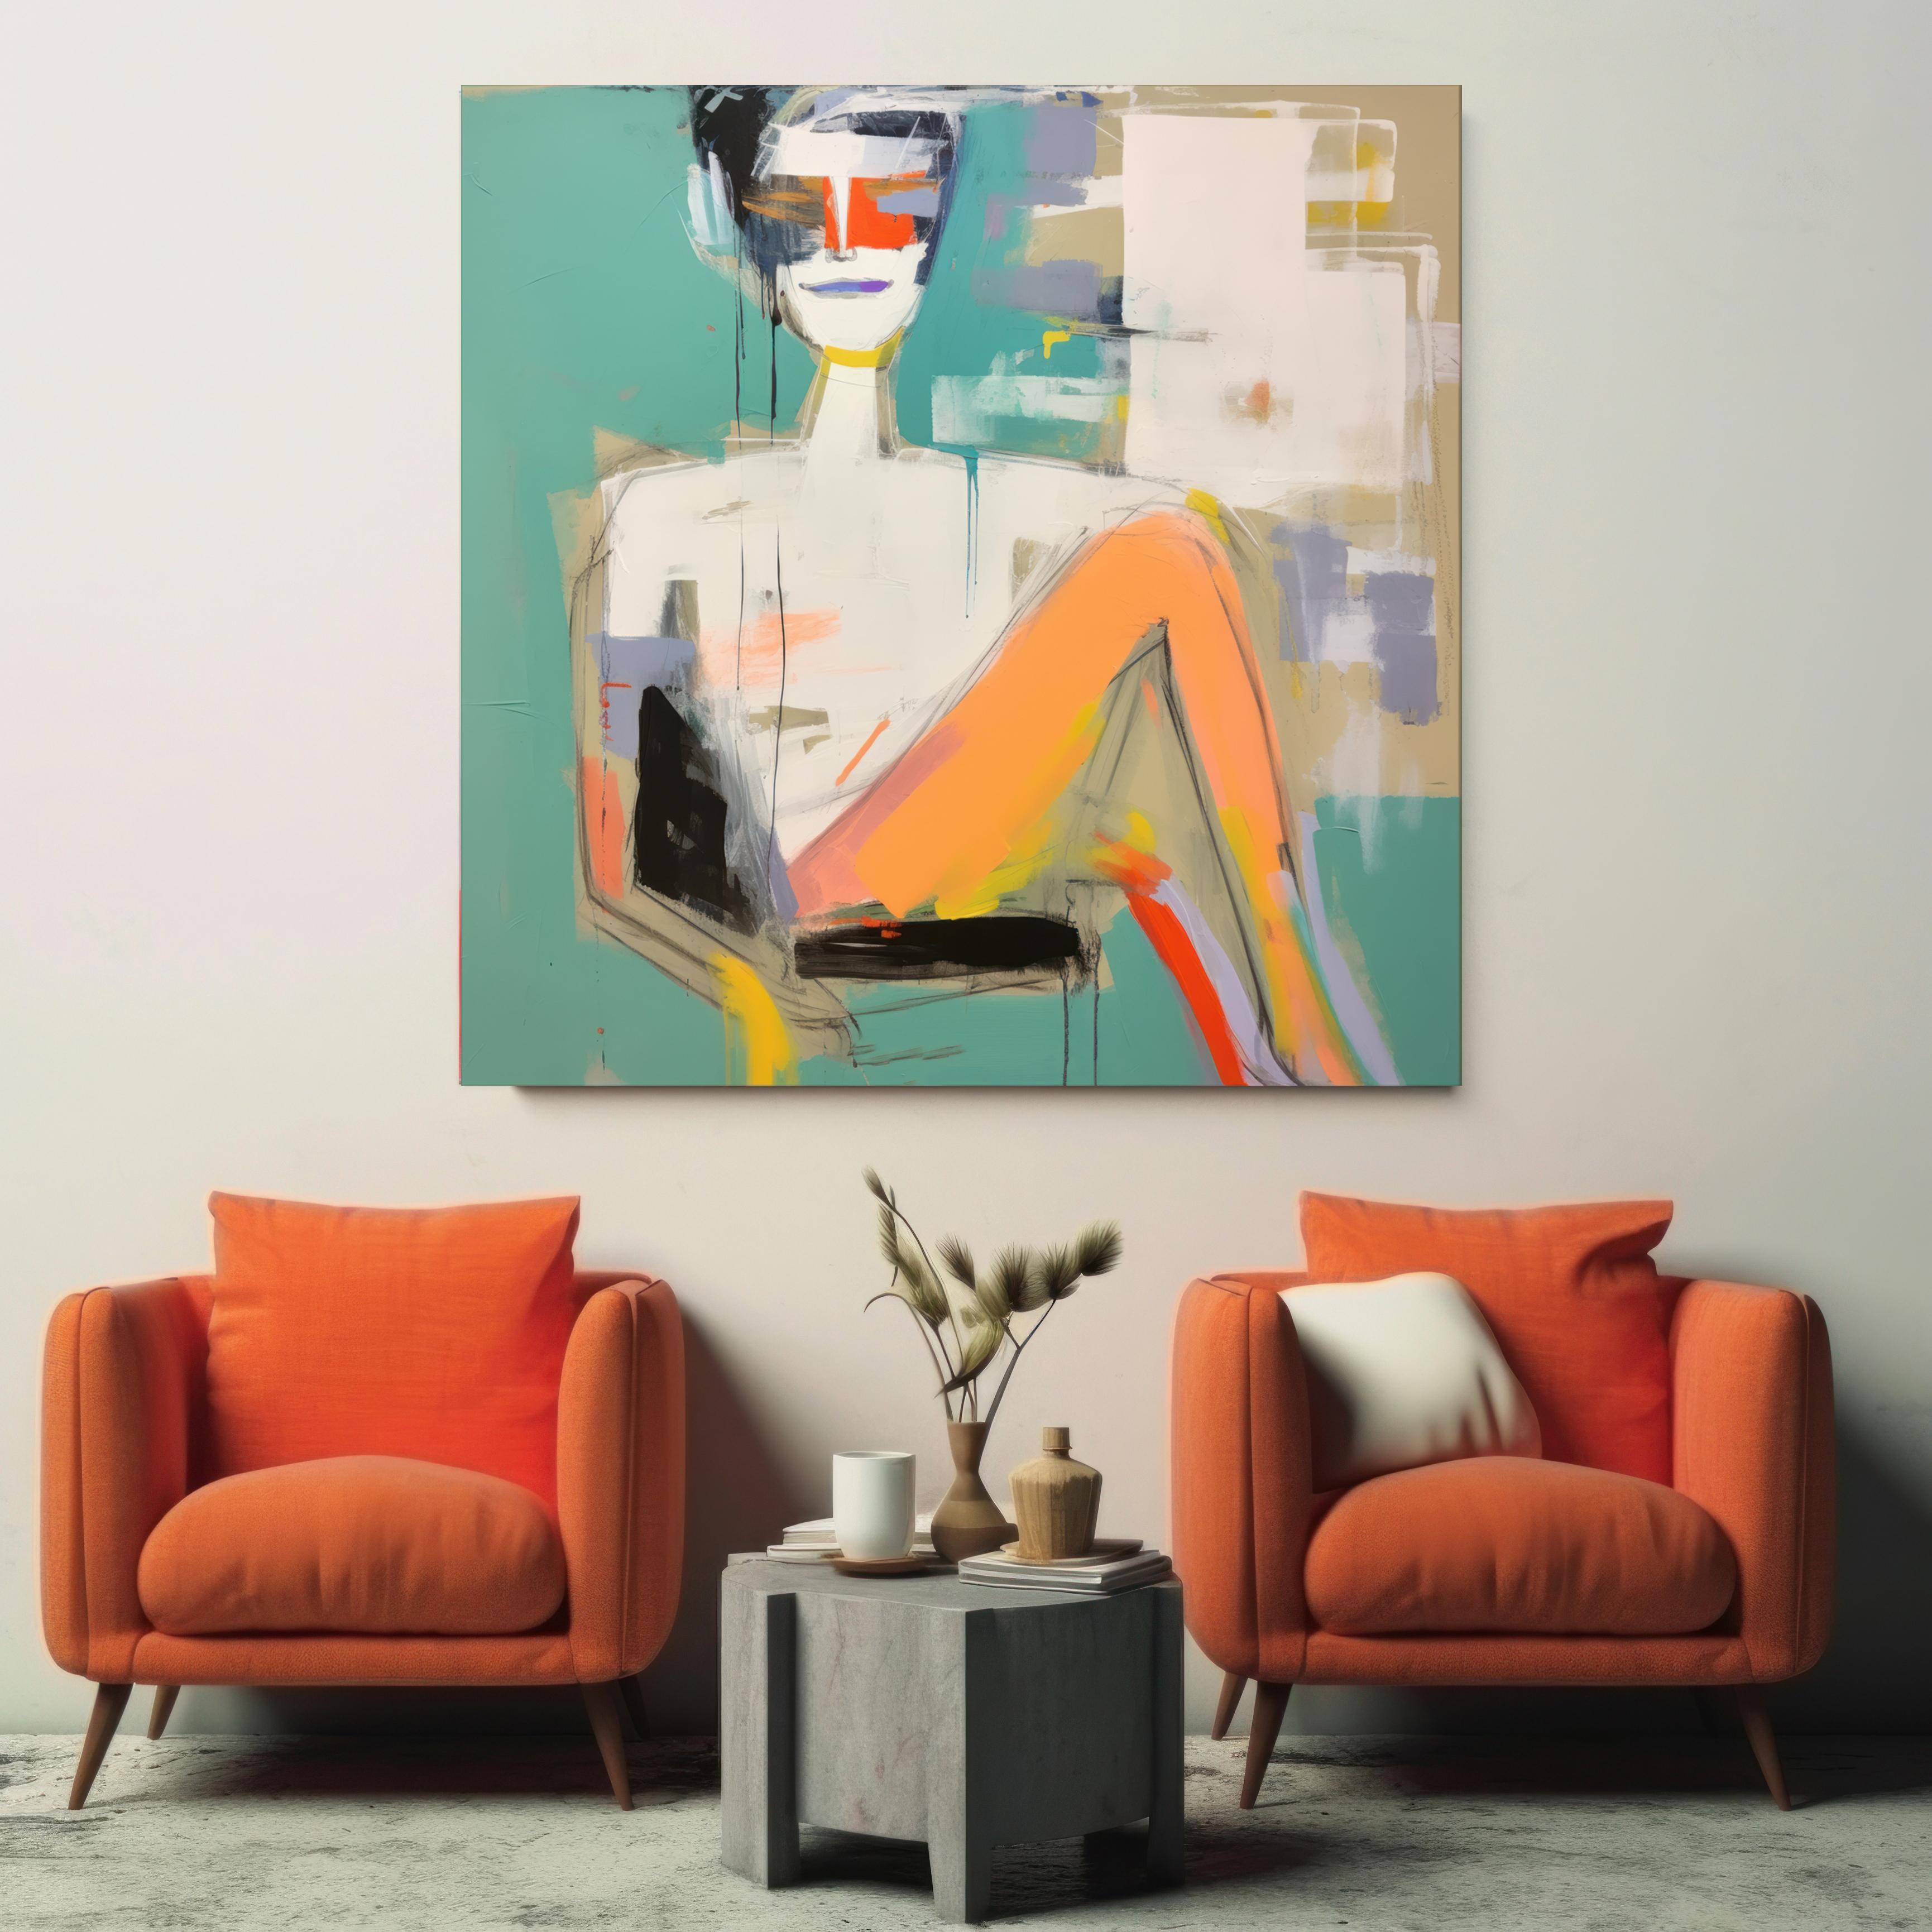 Abstract Cubist Figurative - Limited Edition Textured Canvas Print - HFC 74-1 - Painting by Irena Orlov